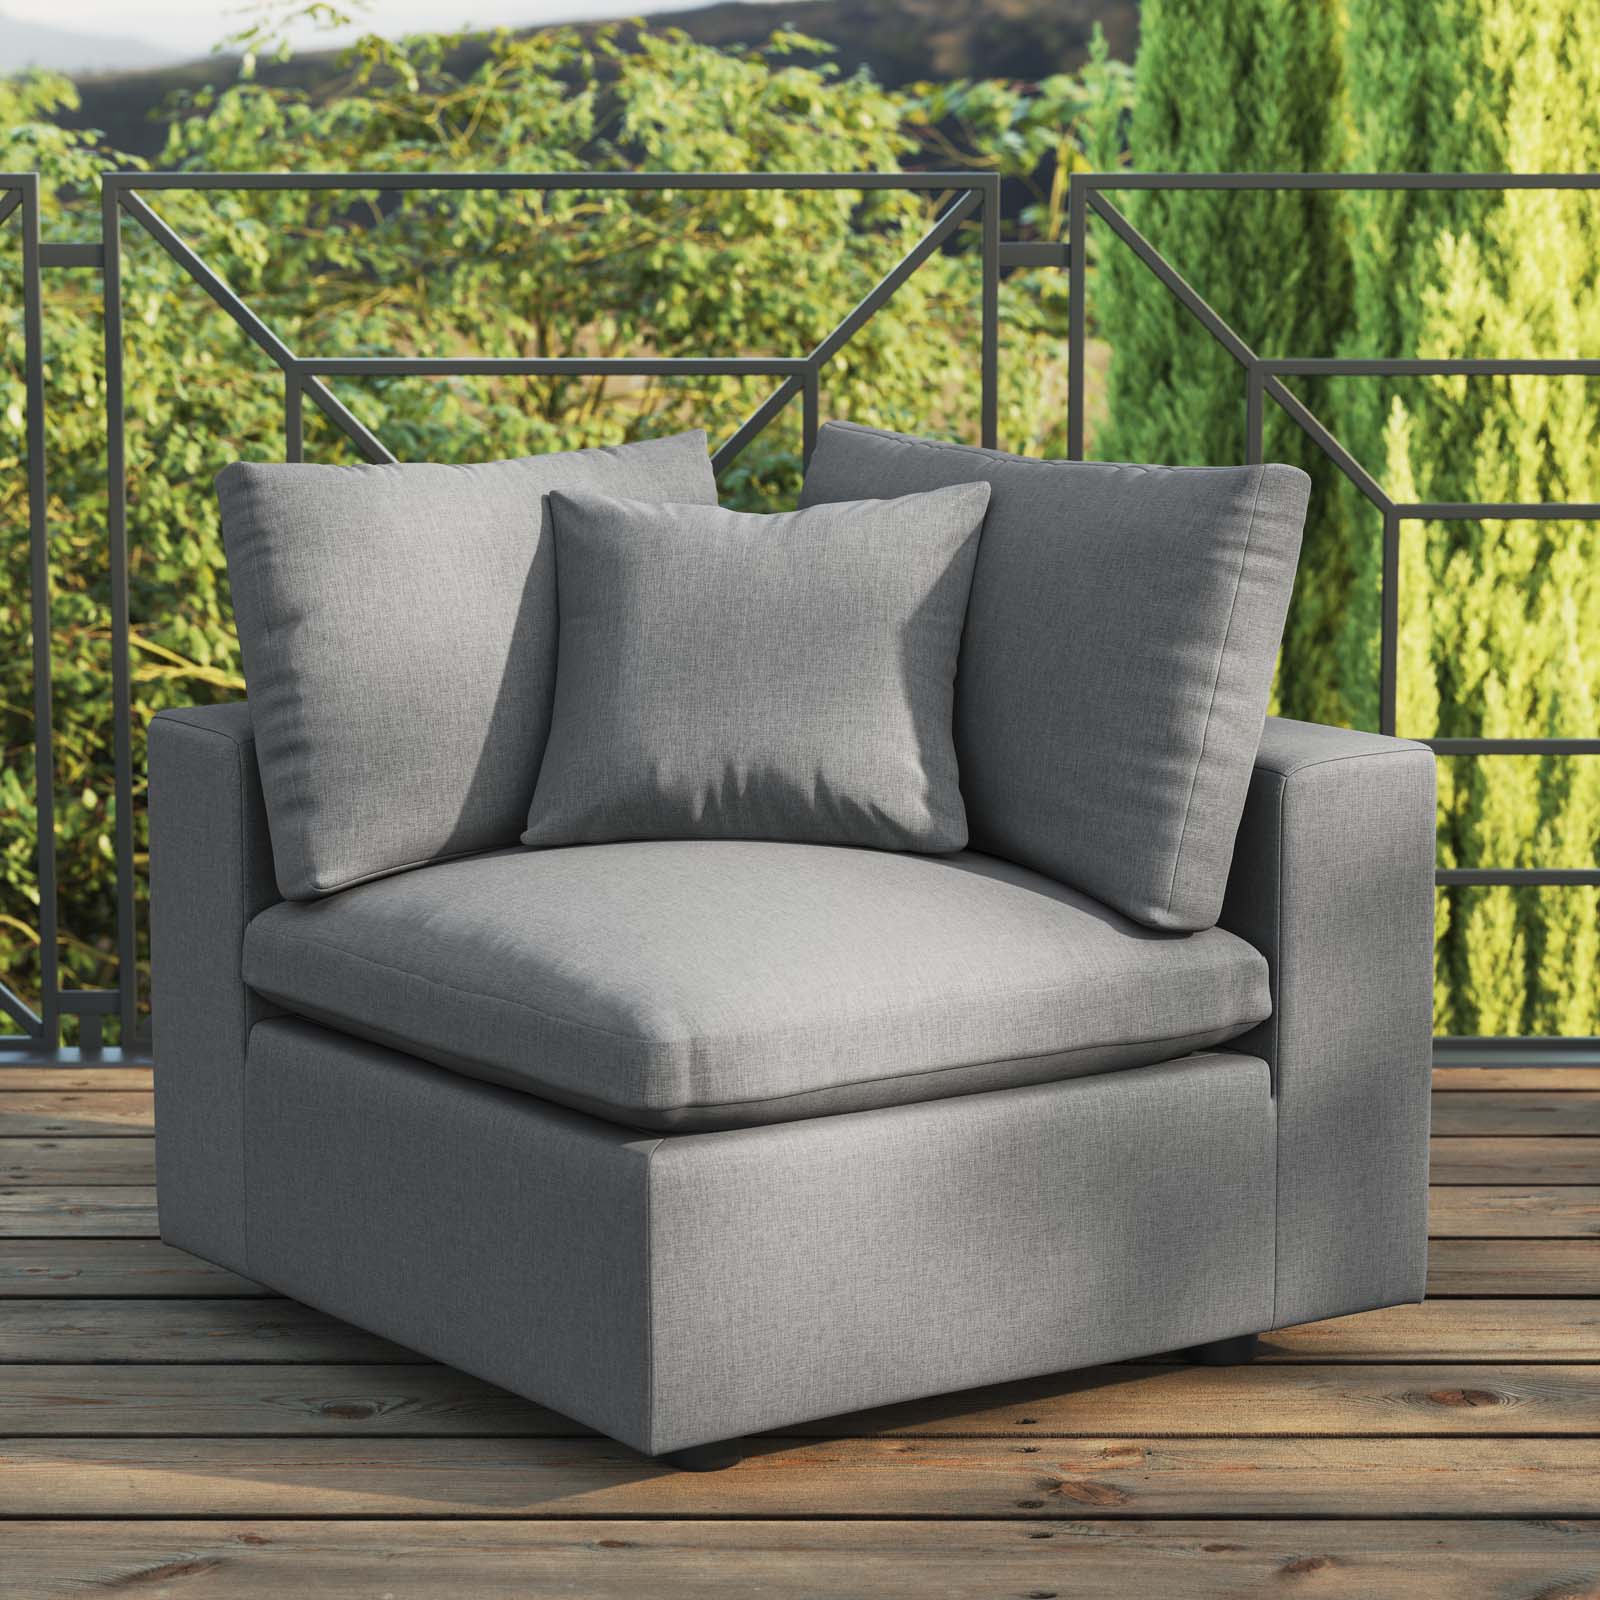 Commix Overstuffed Outdoor Patio Corner Chair - East Shore Modern Home Furnishings